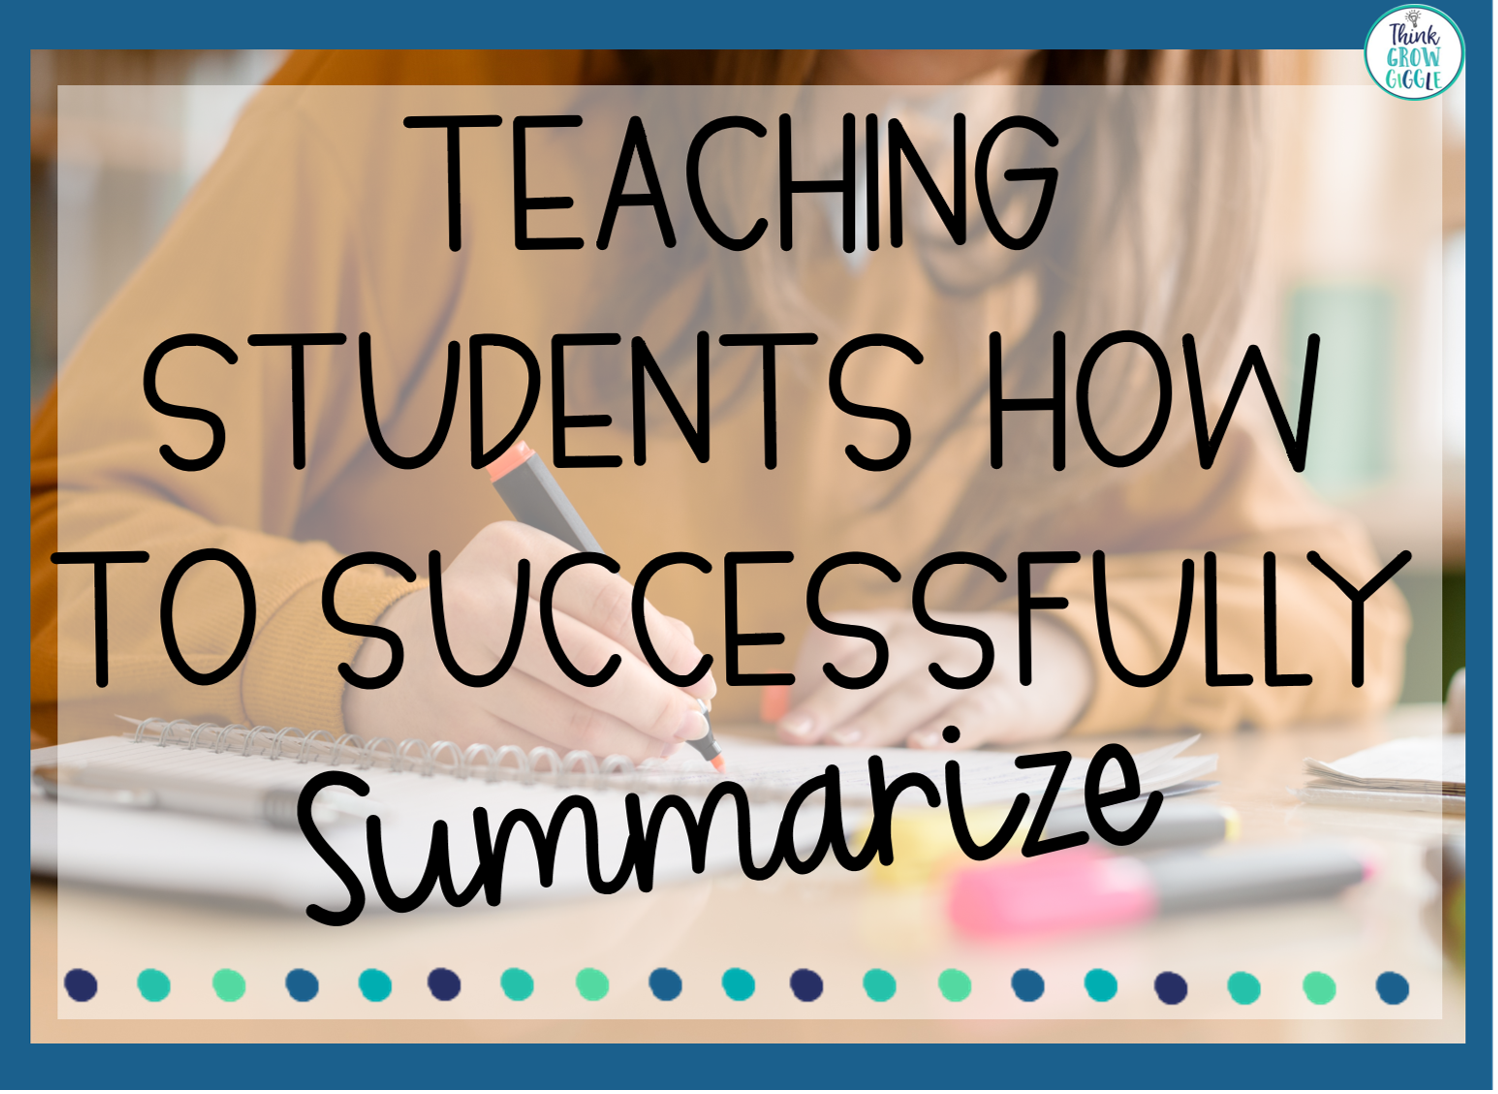 4 Ways to Help Students Successfully Summarize - Think Grow Giggle